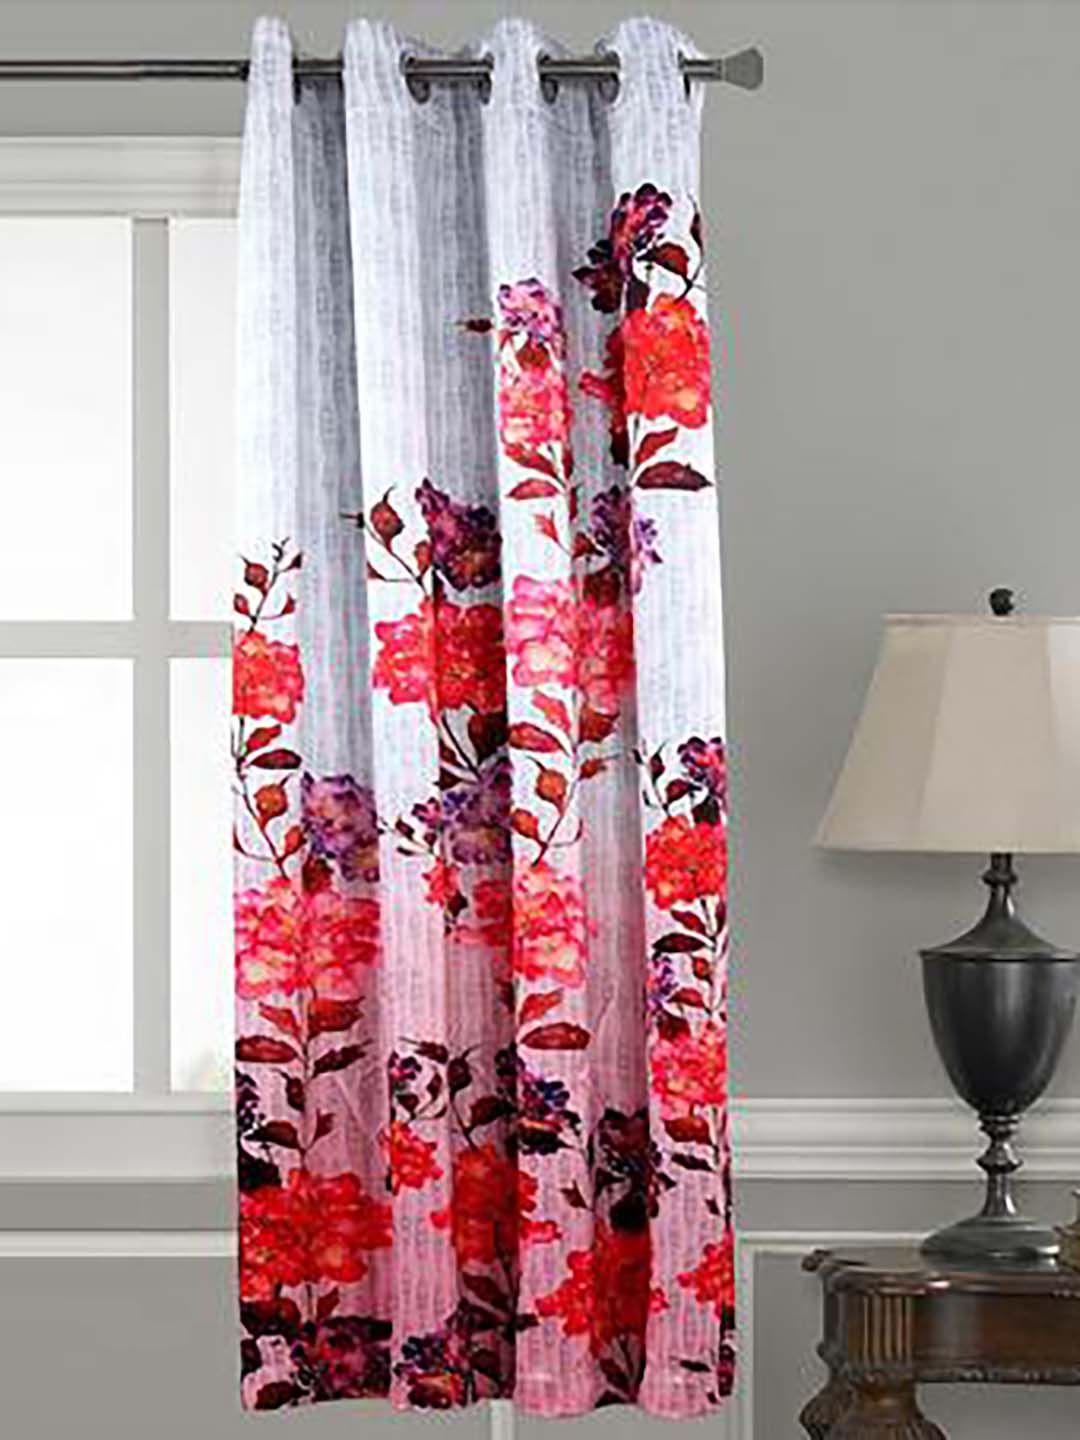 Lushomes White & Red Floral Digitally 3D Printed Window Curtain Price in India